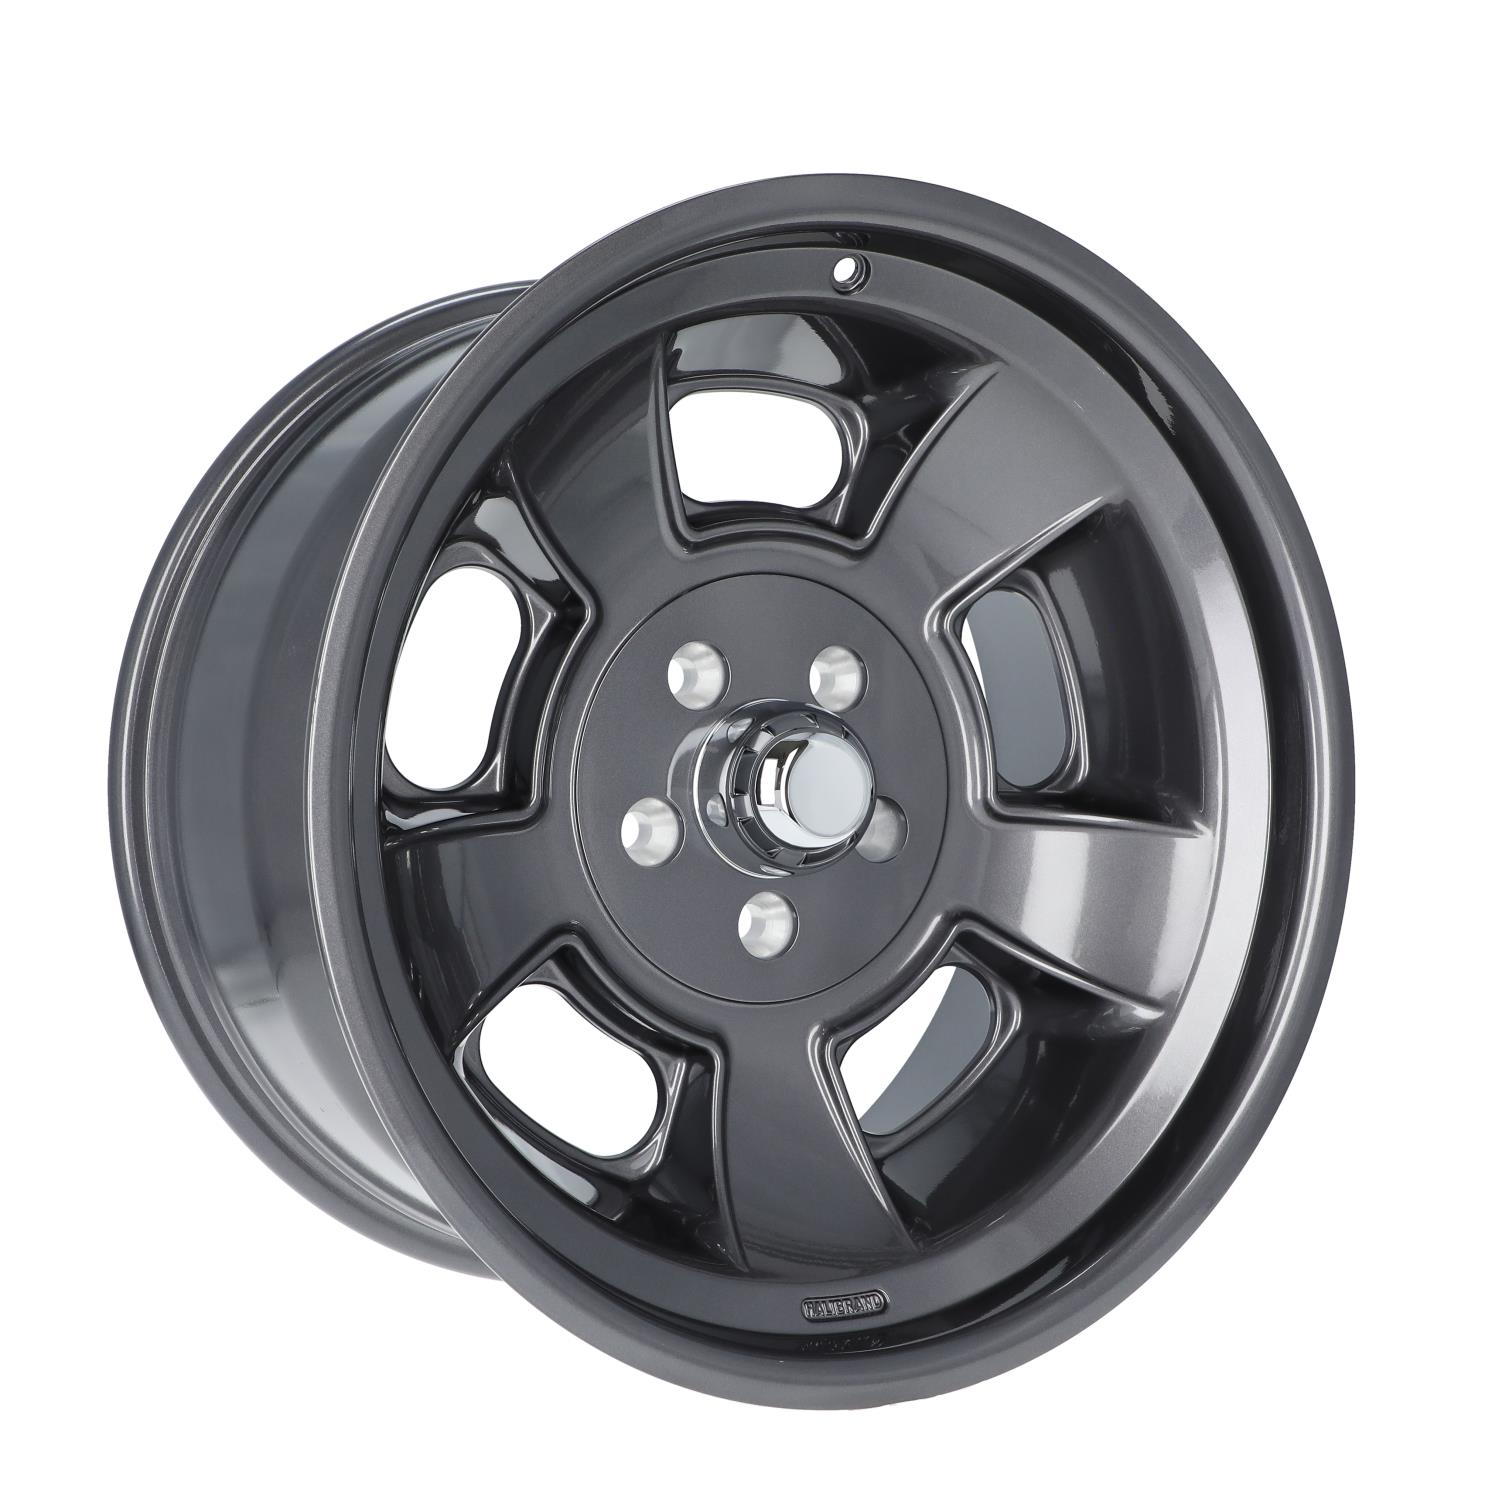 Sprint Rear Wheel, Size: 19x10", Bolt Pattern: 5x5", Backspace: 5.5" [Anthracite - Gloss Clearcoat]